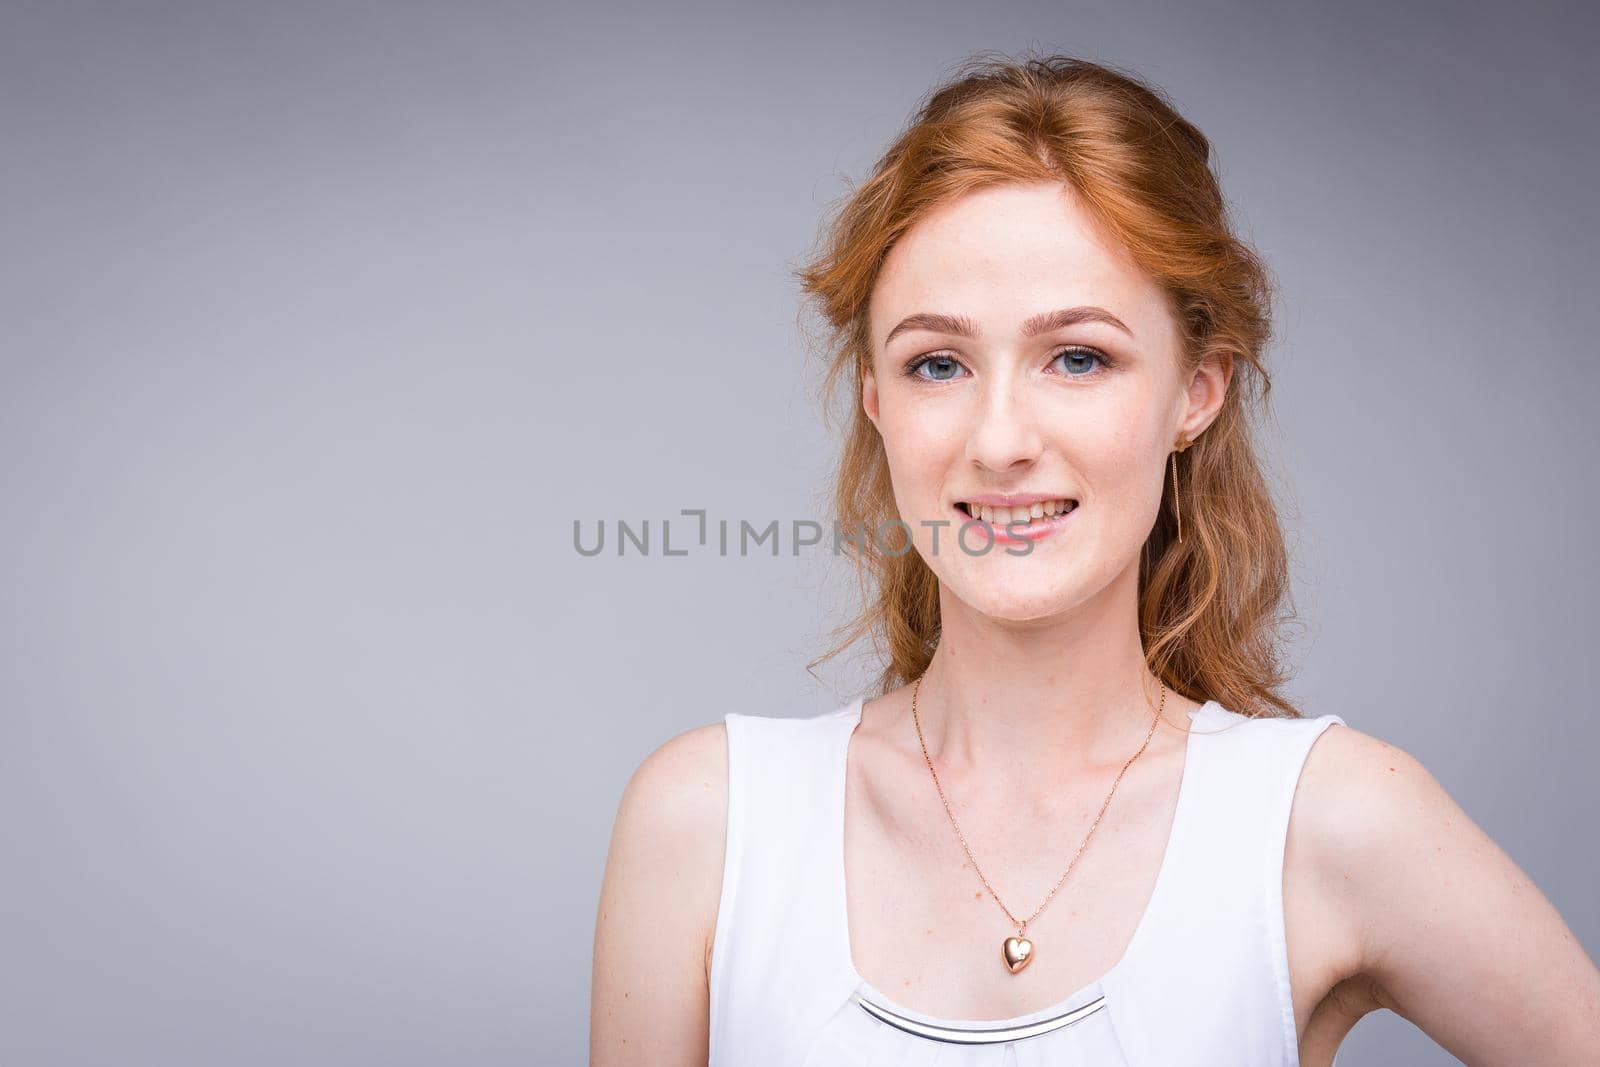 Closeup portrait young, beautiful business woman, student with lred, curly hair and freckles on face on gray background in the studio. Dressed in white blouse with short sleeves about open shoulders by Tomashevska